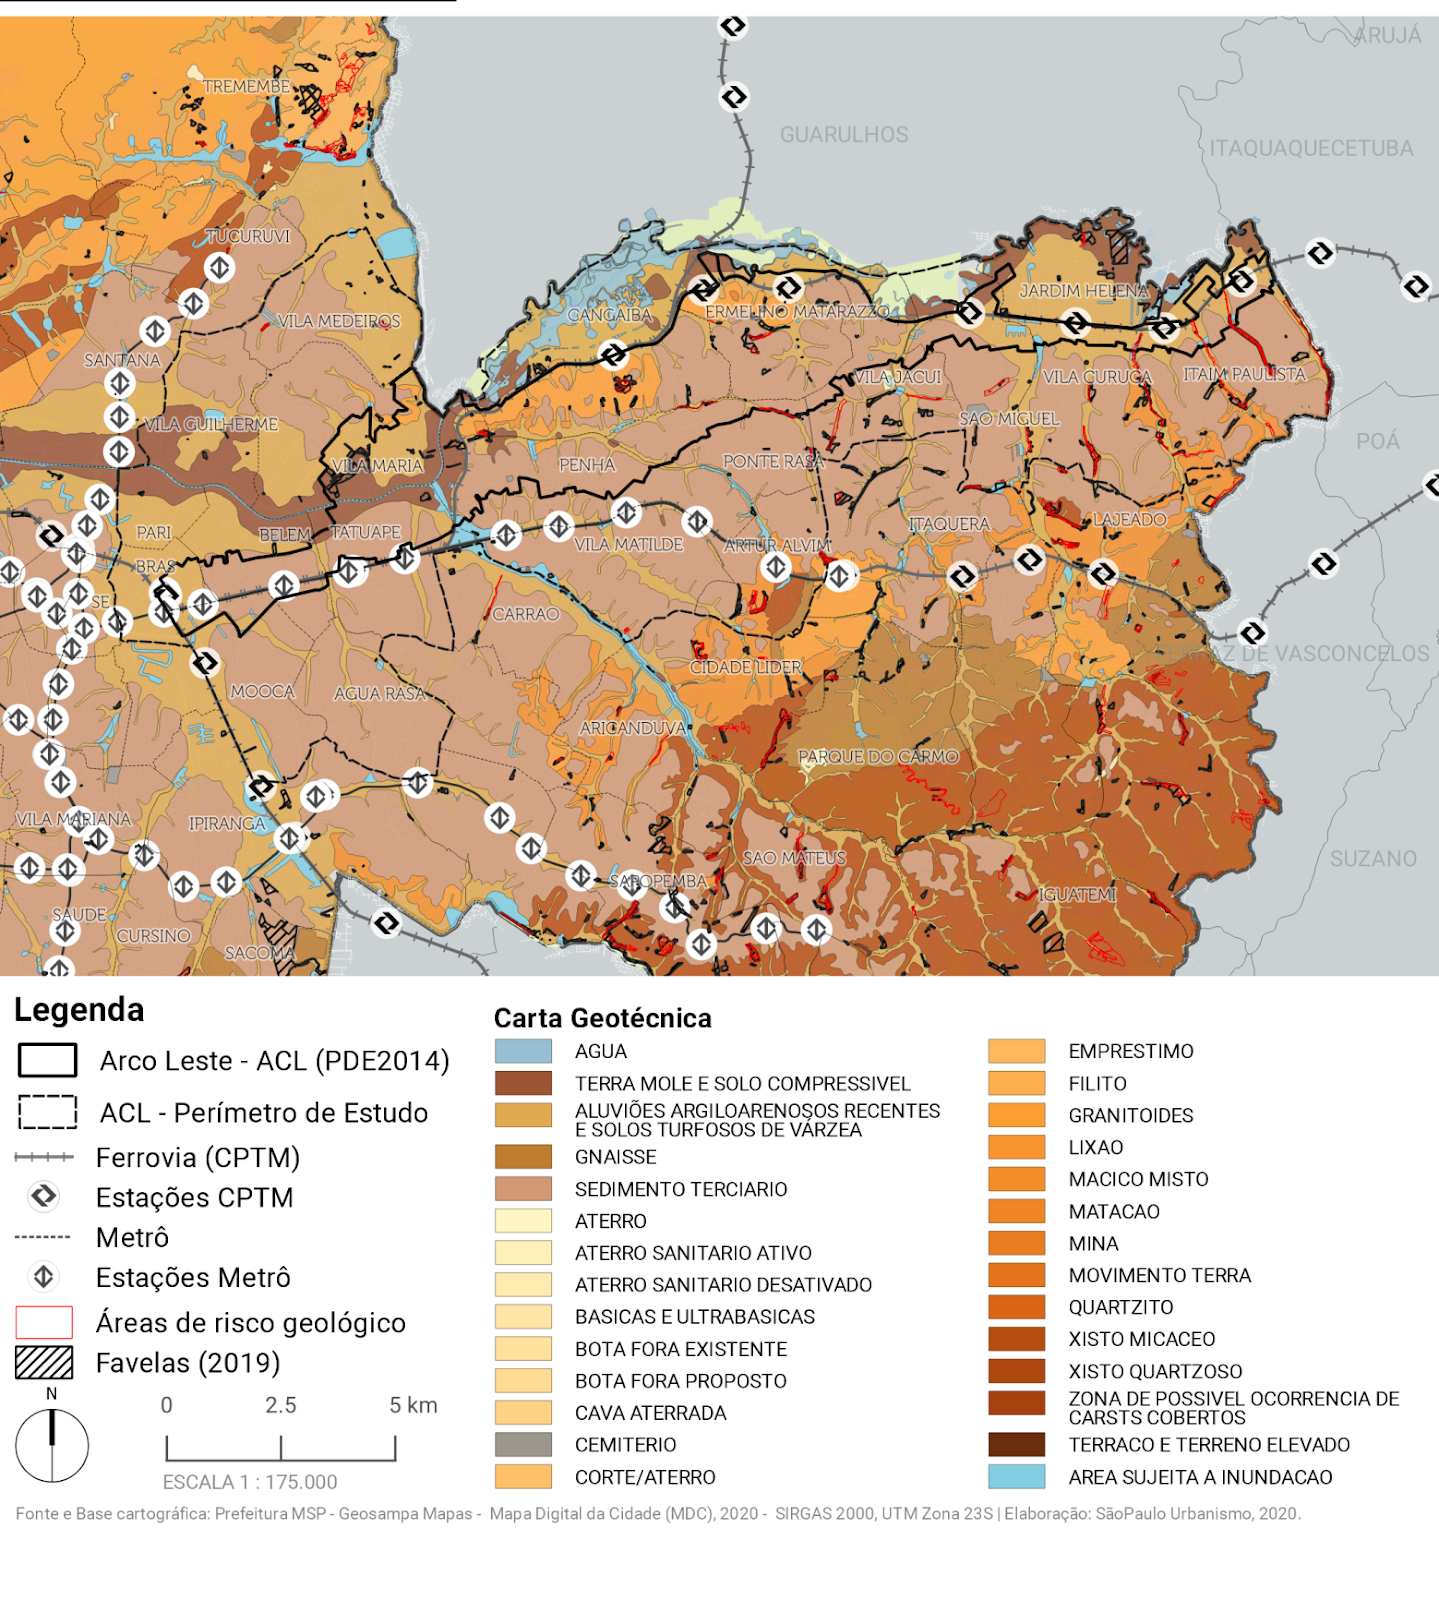 ACL_01_01_Carta-Geotecnica_Areas-Risco-Geologico_Favelas_r00.png